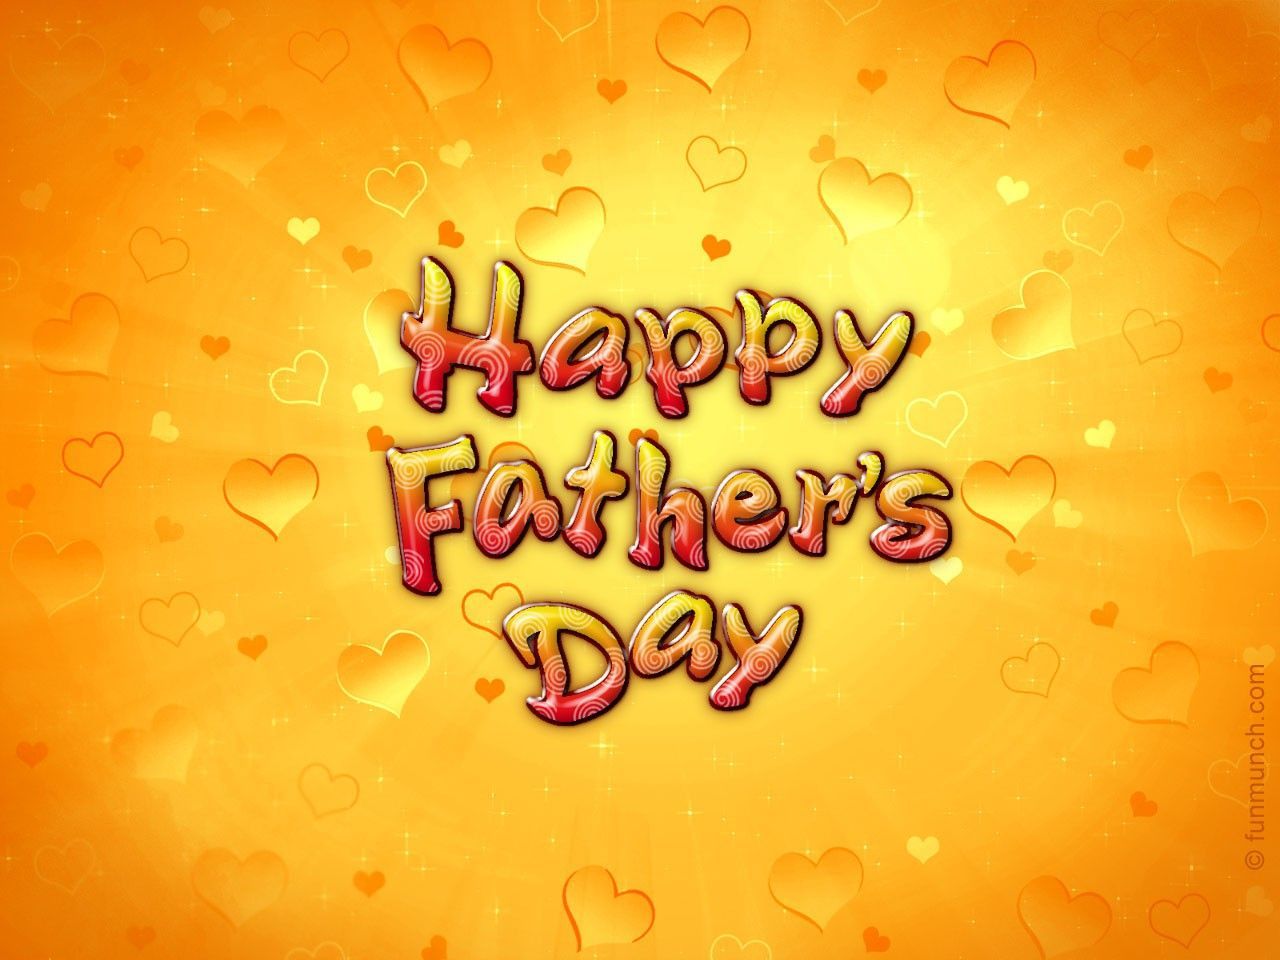 Fathers Day Wallpaper. to5animations.com Wallpaper